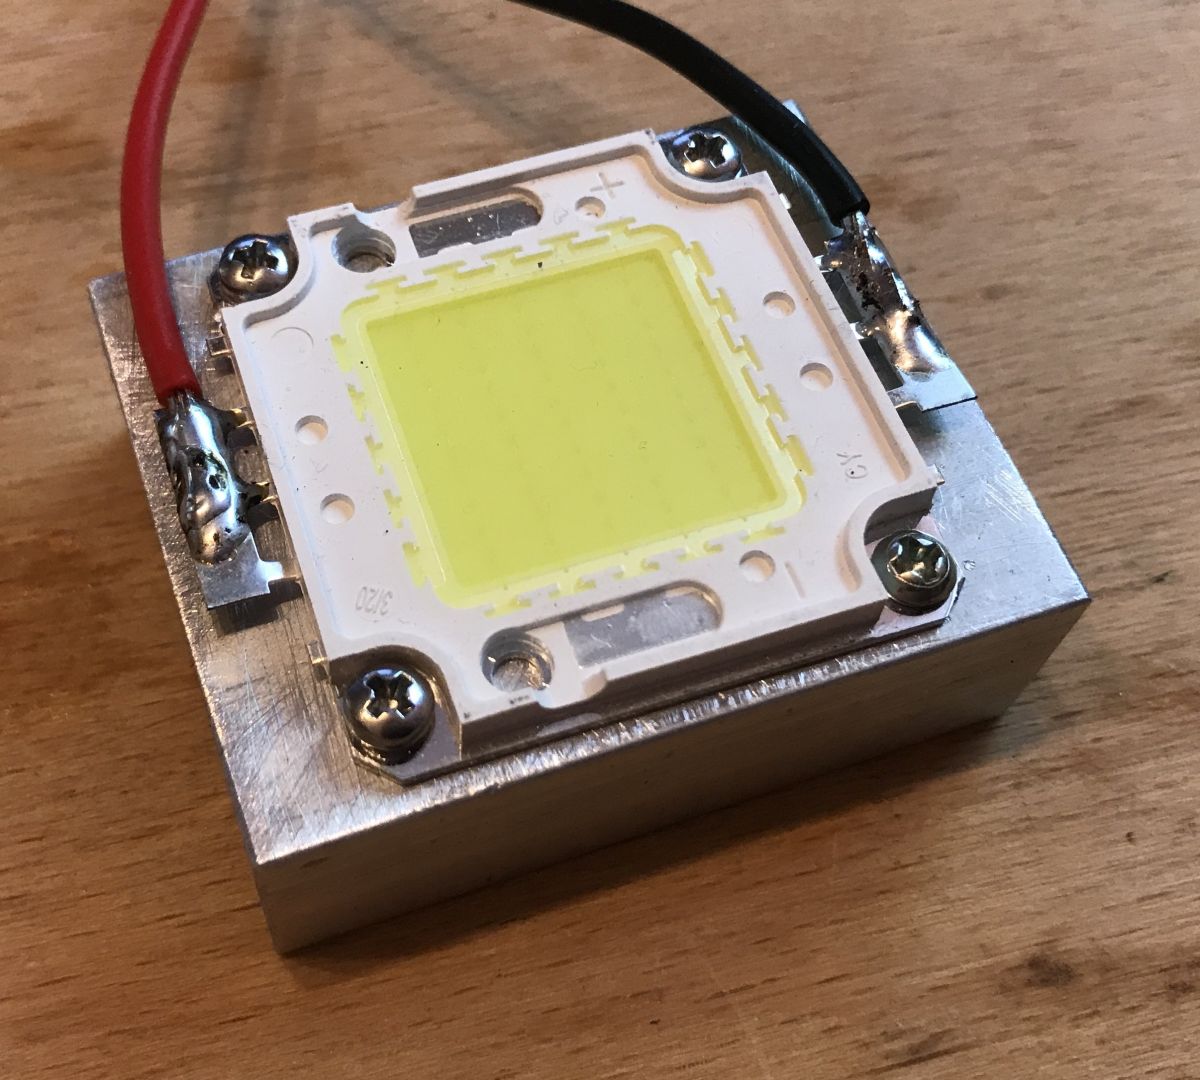 dividend worst butter 50W COB 30V-36V LED minitest from China - will it really be 50W?